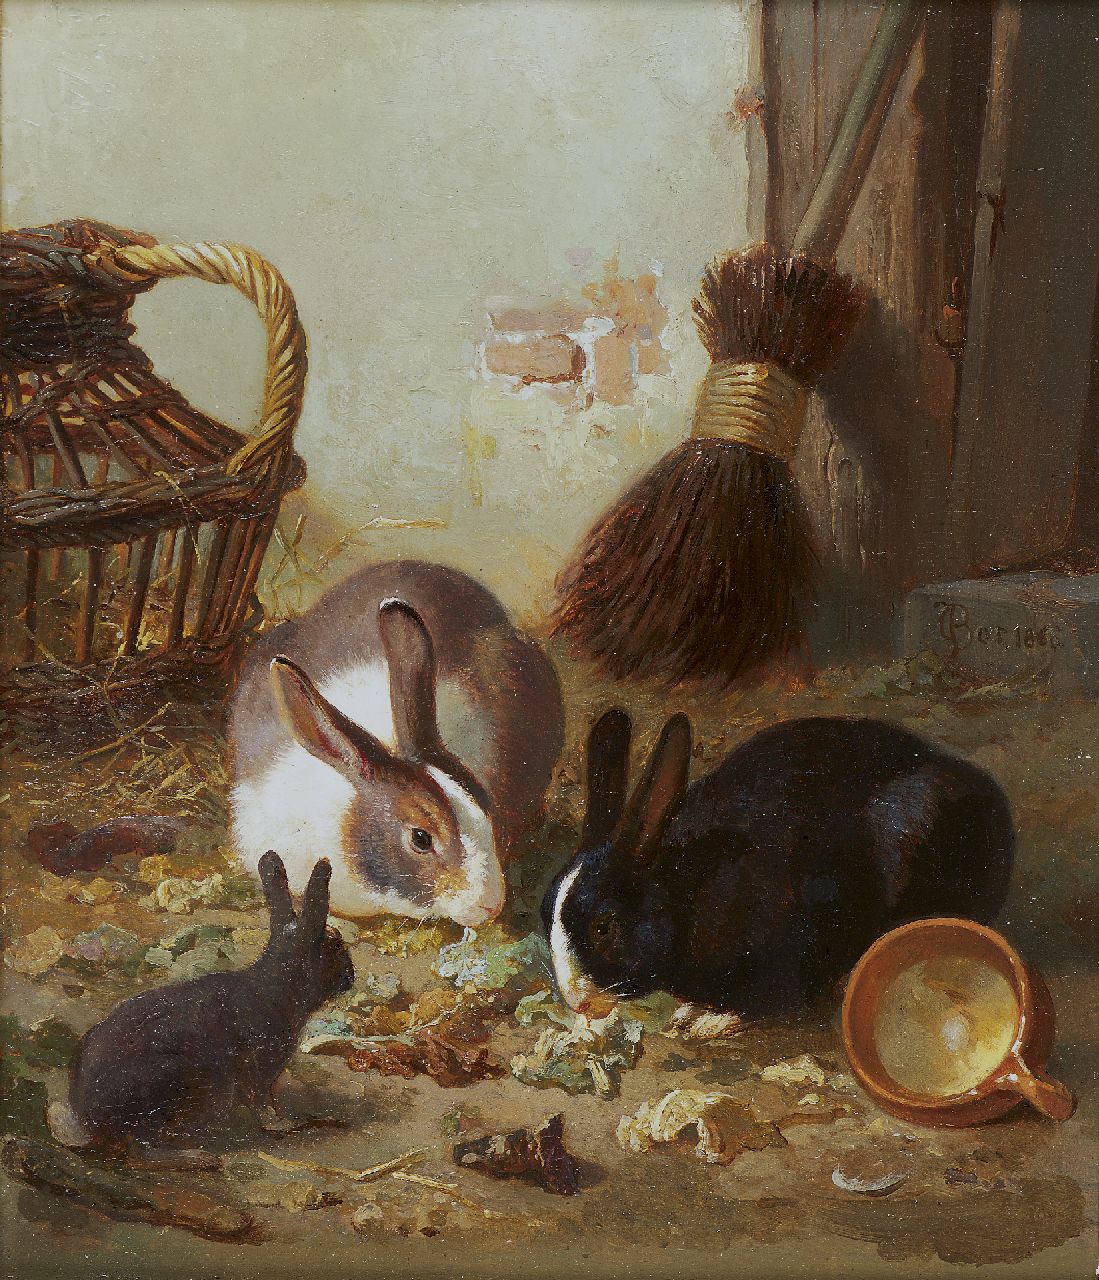 Bos G.J.  | Gerardus Johannes Bos, Rabbits, oil on panel 20.8 x 17.6 cm, signed r.c. and dated 1866